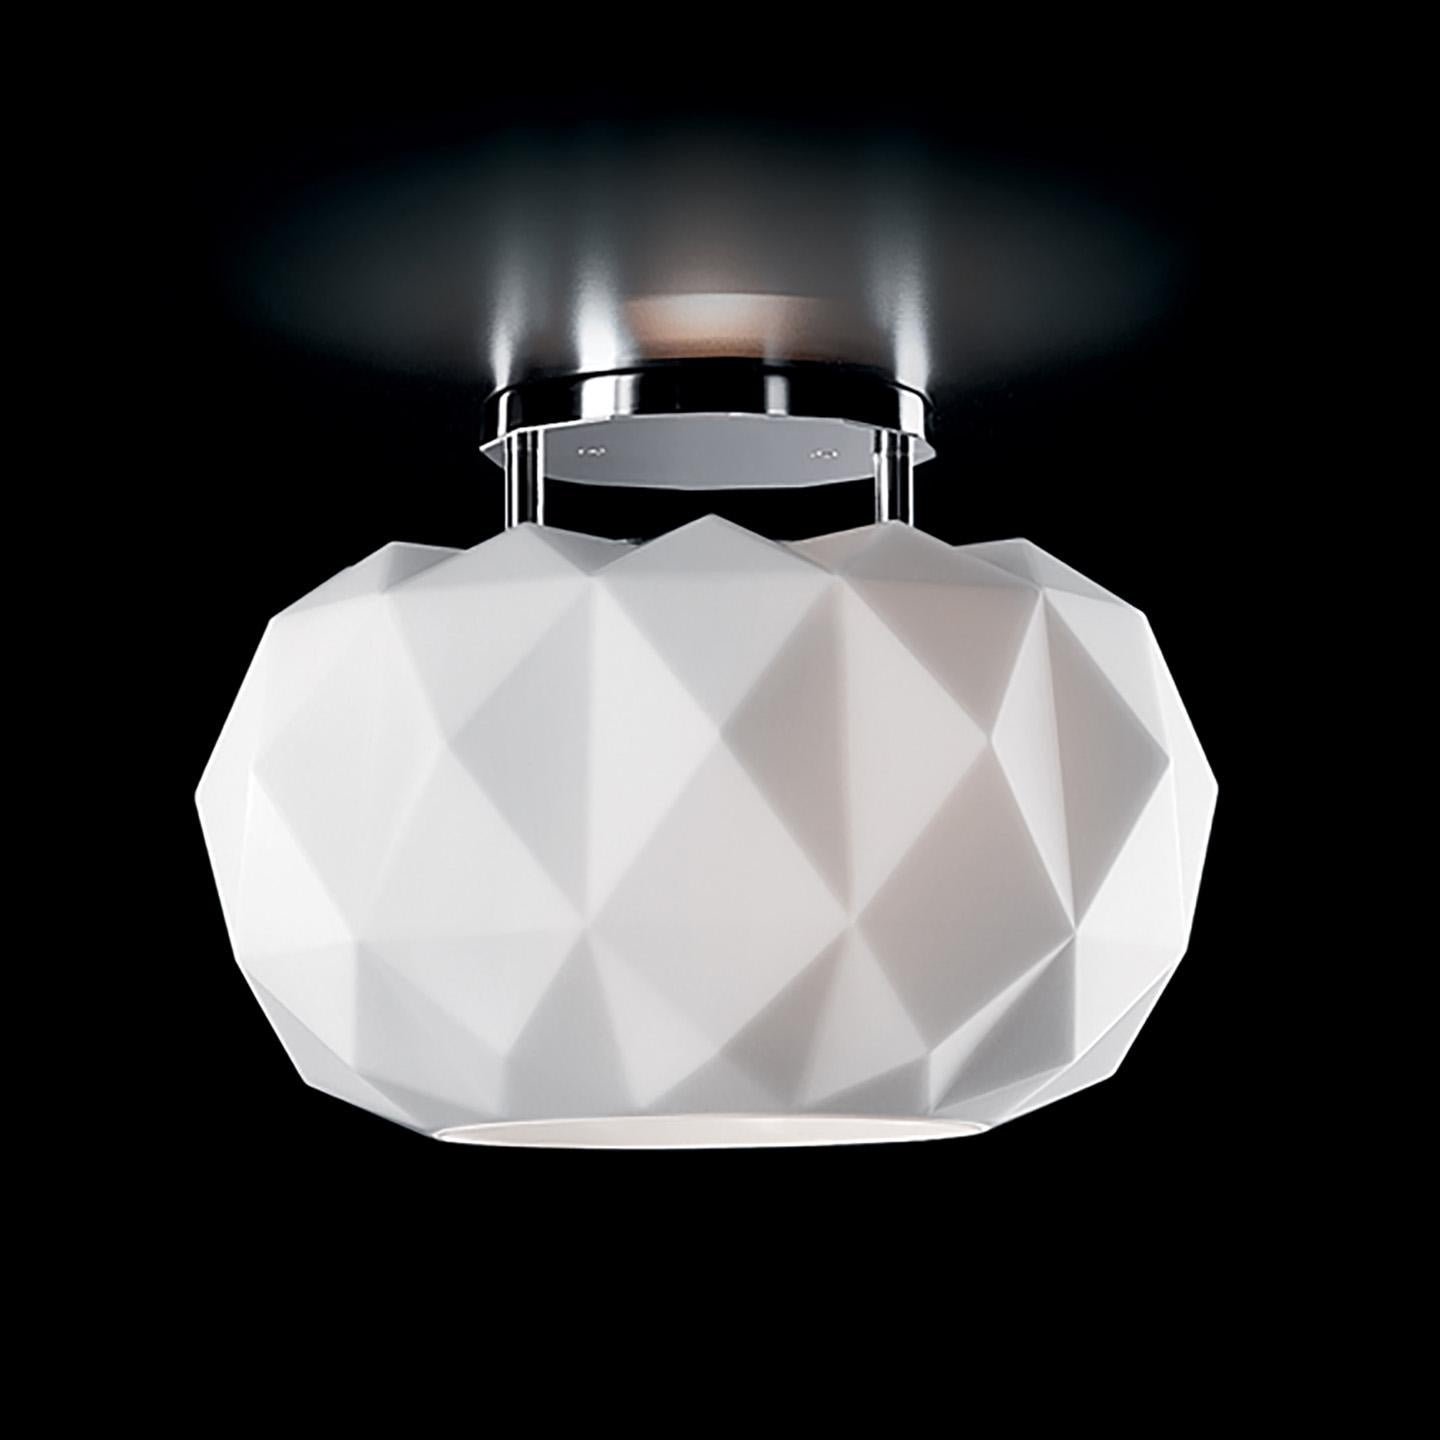 Leucos Deluxe PL 35 LED Flush Mount in Satin White and Chrome by Archirivolto